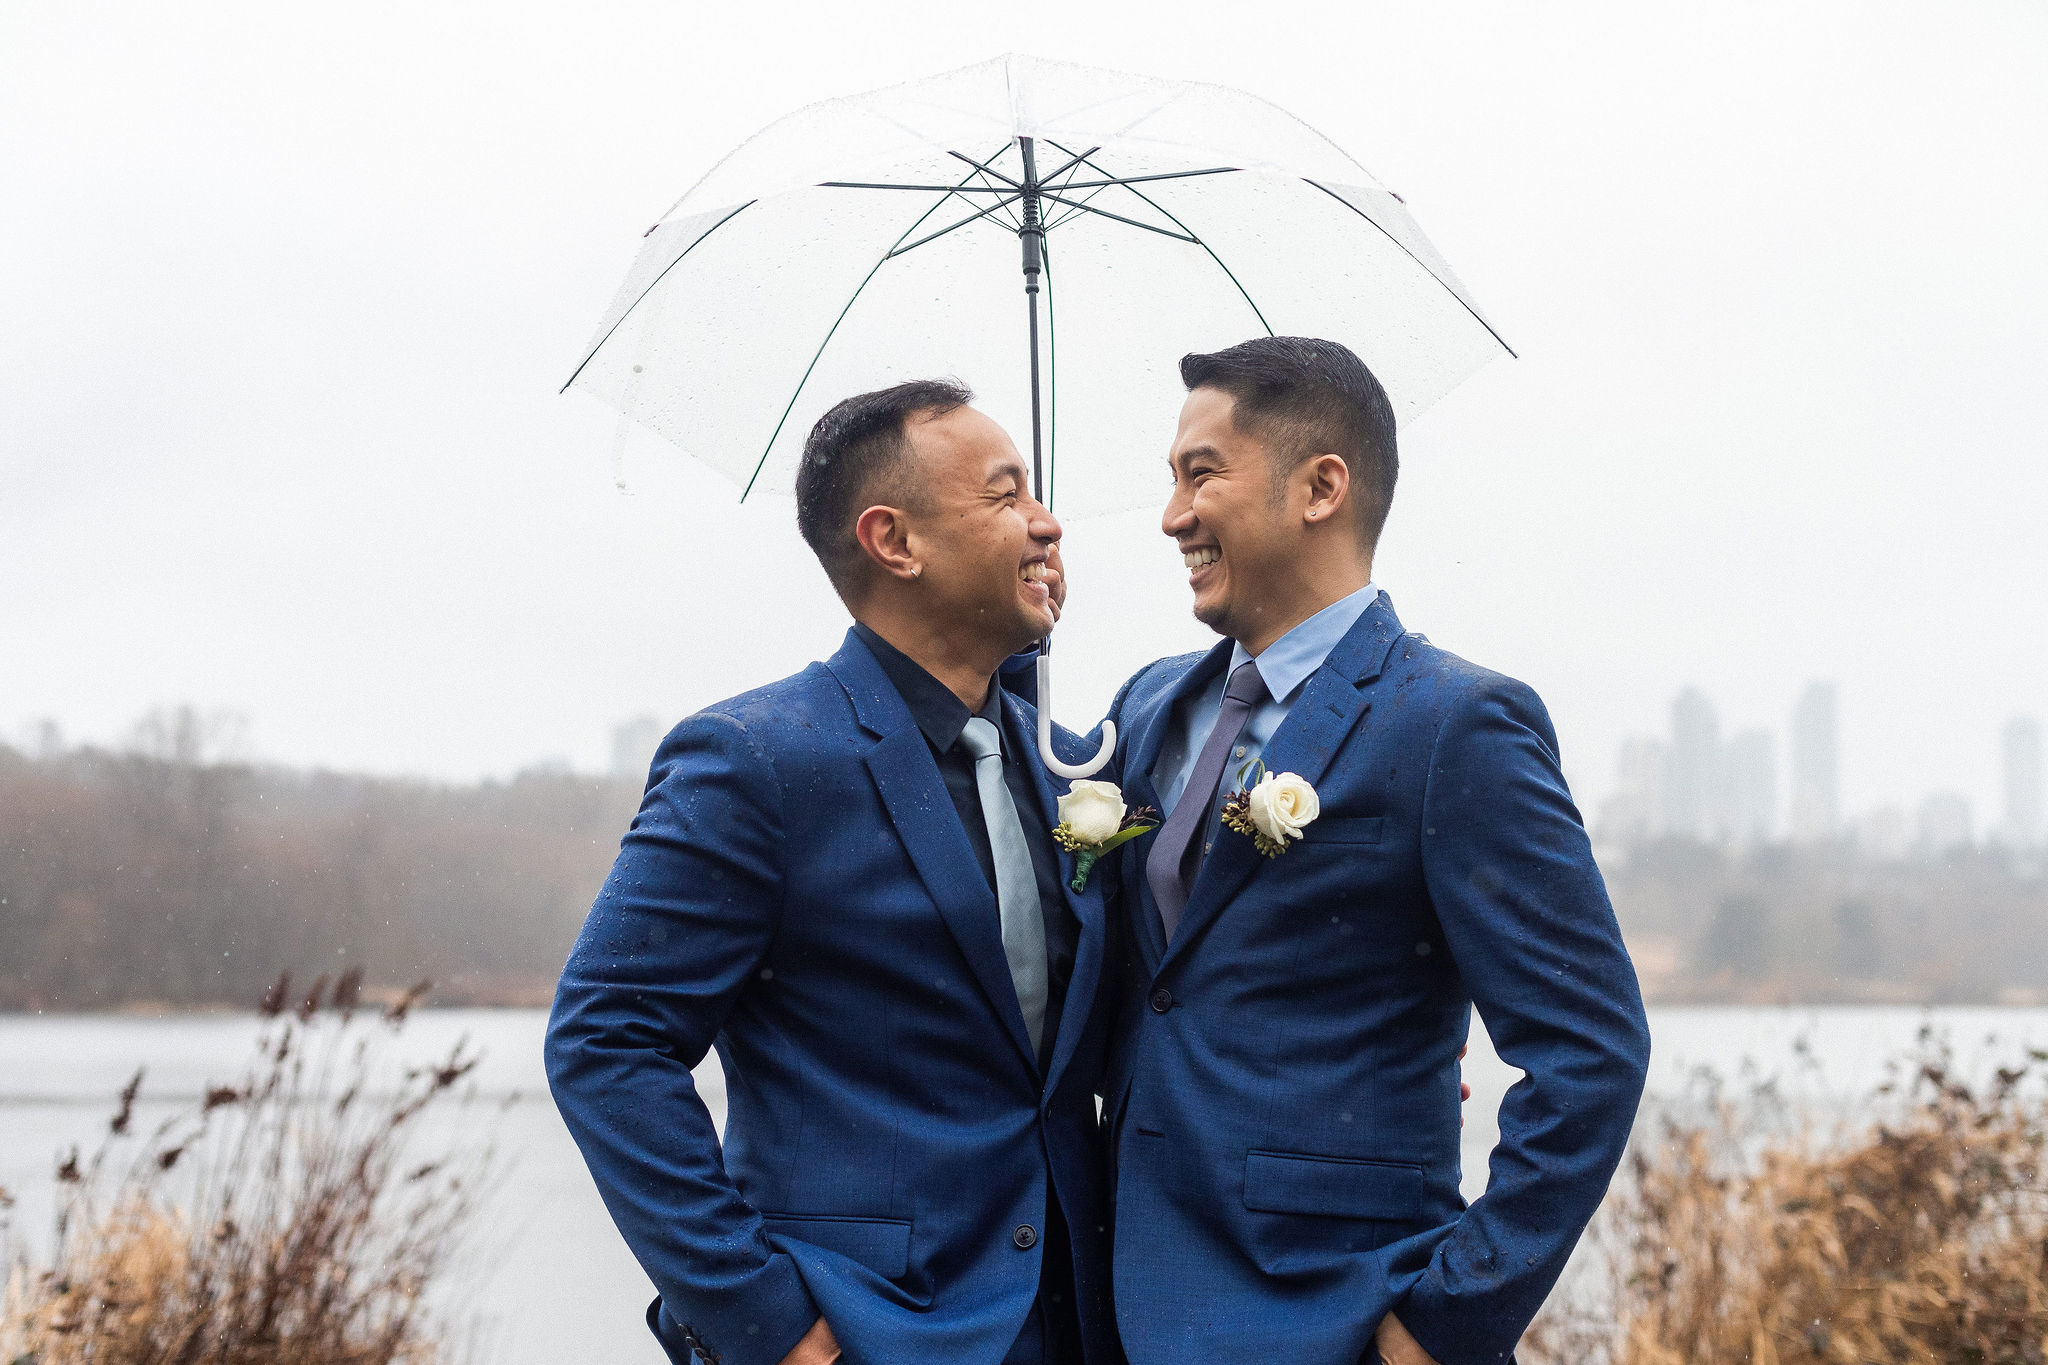 grooms in navy suits at rainy vancouver wedding, queer friendly wedding vendors